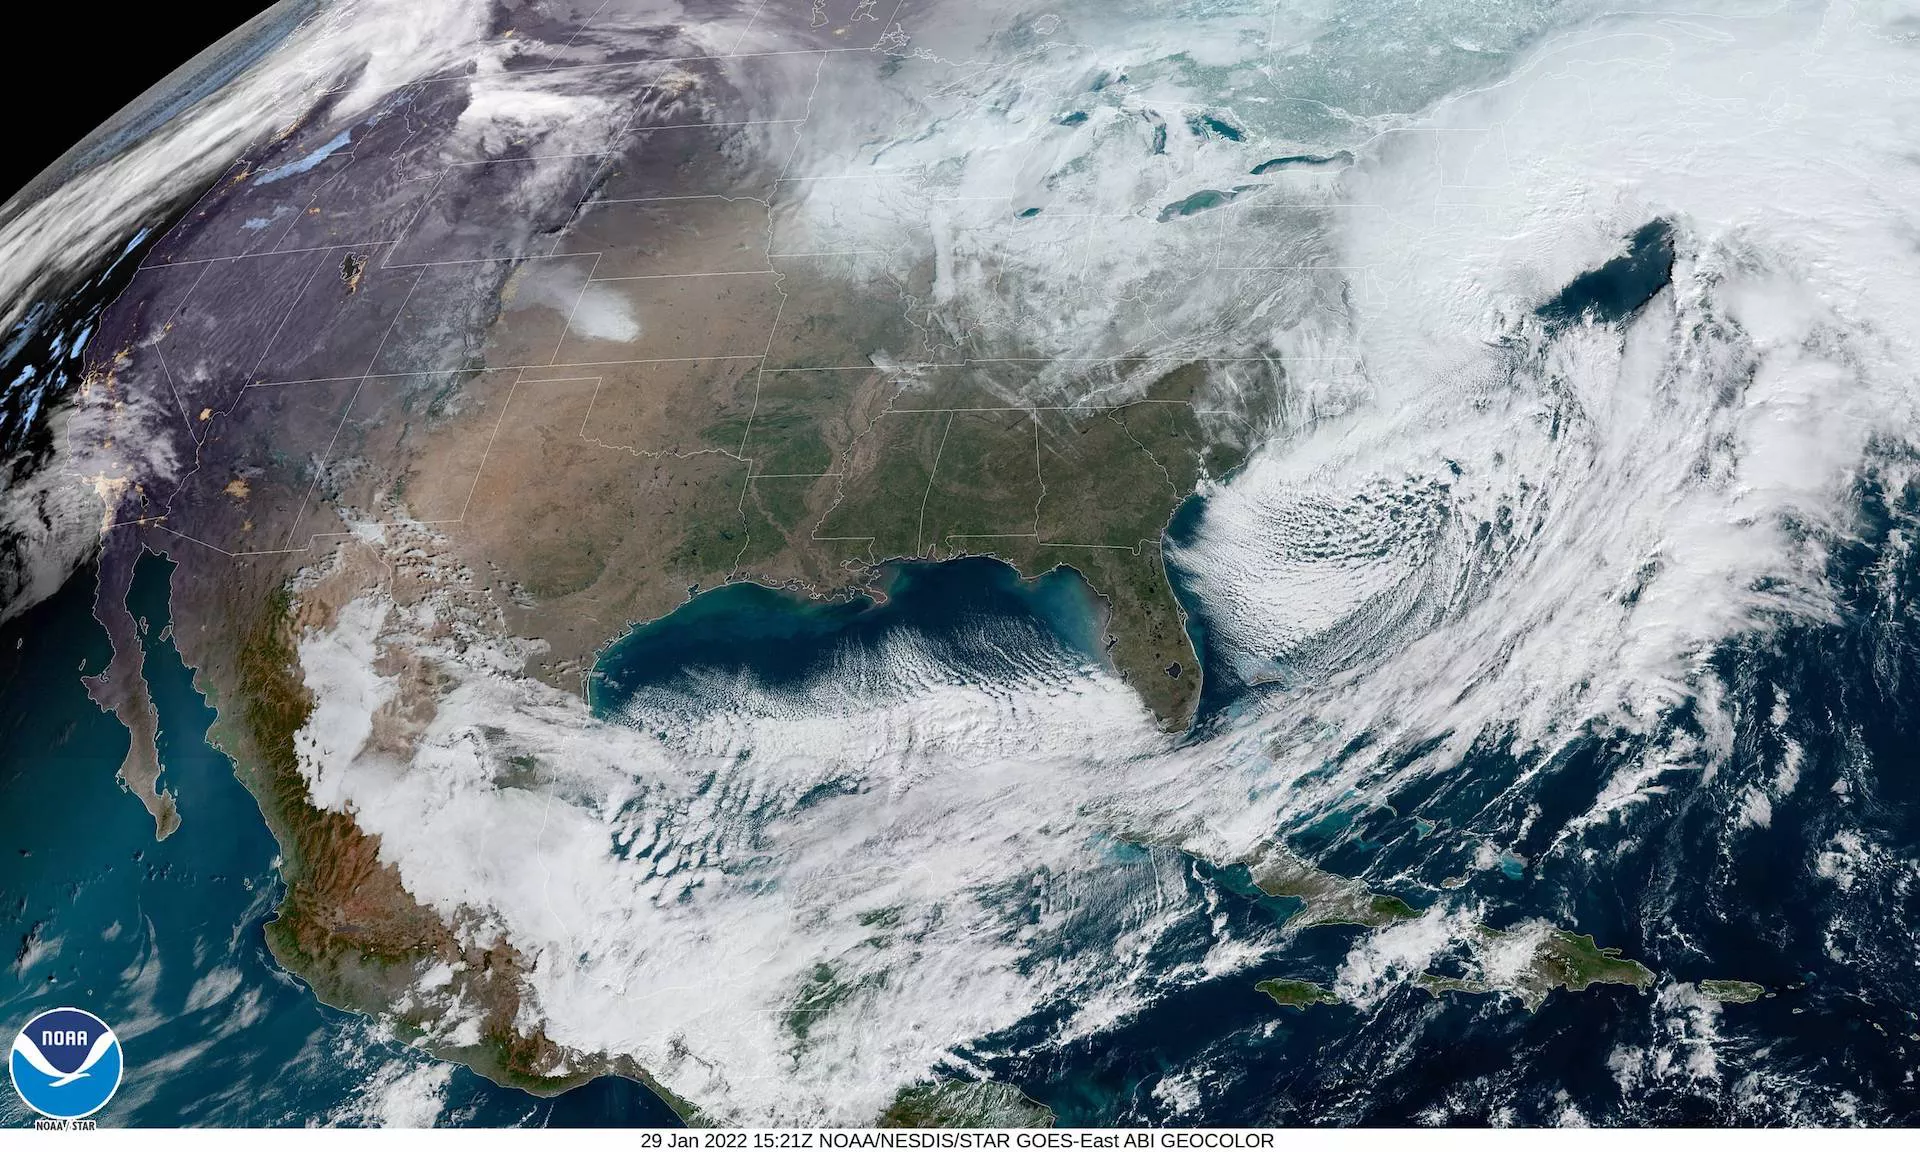   Satellite image of storm over the U.S.